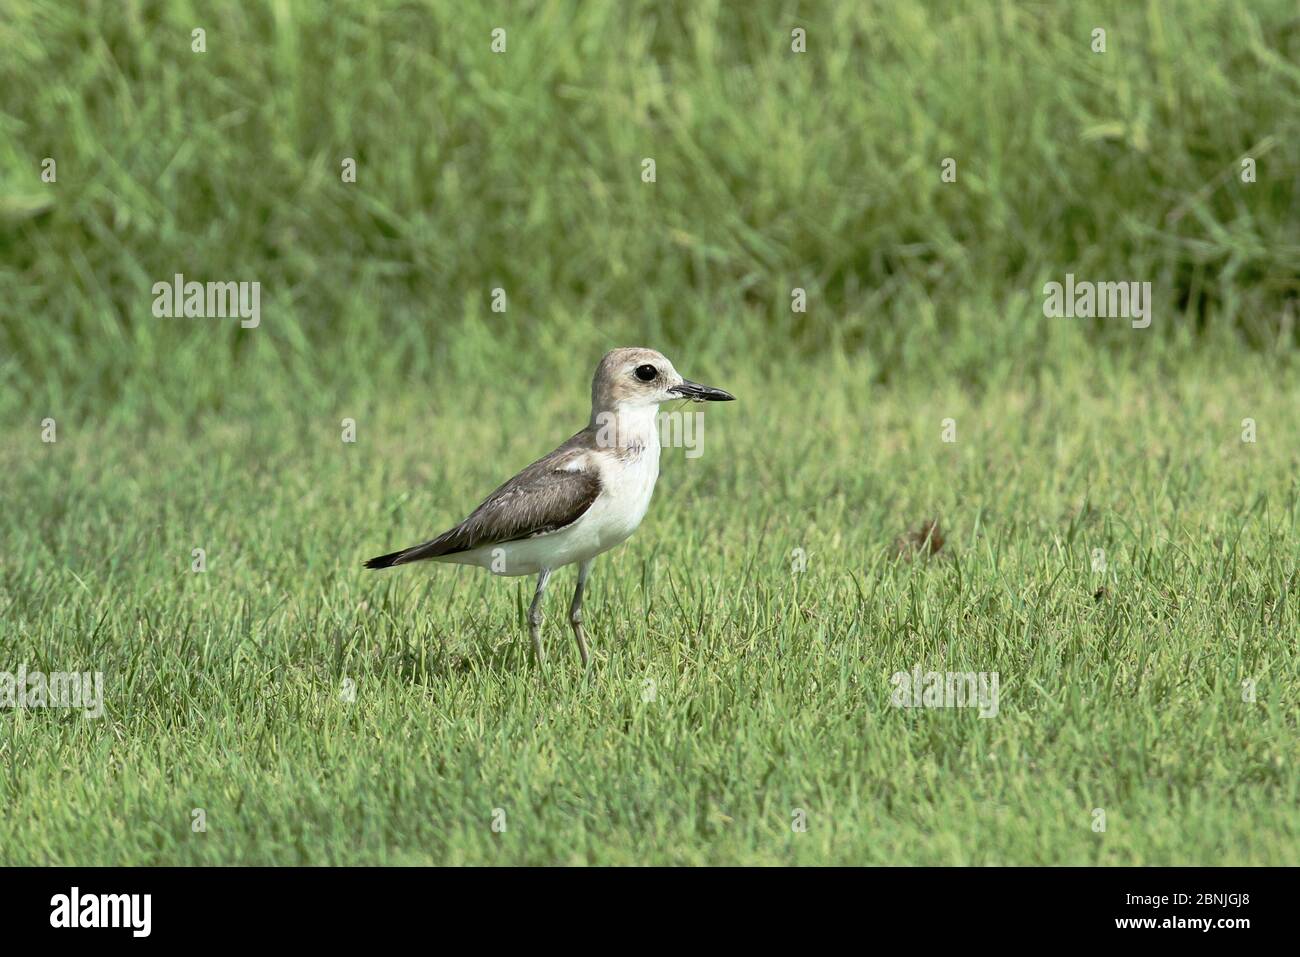 Greater sand plover (Charadrius leschenaultii) on grass, Oman, August Stock Photo